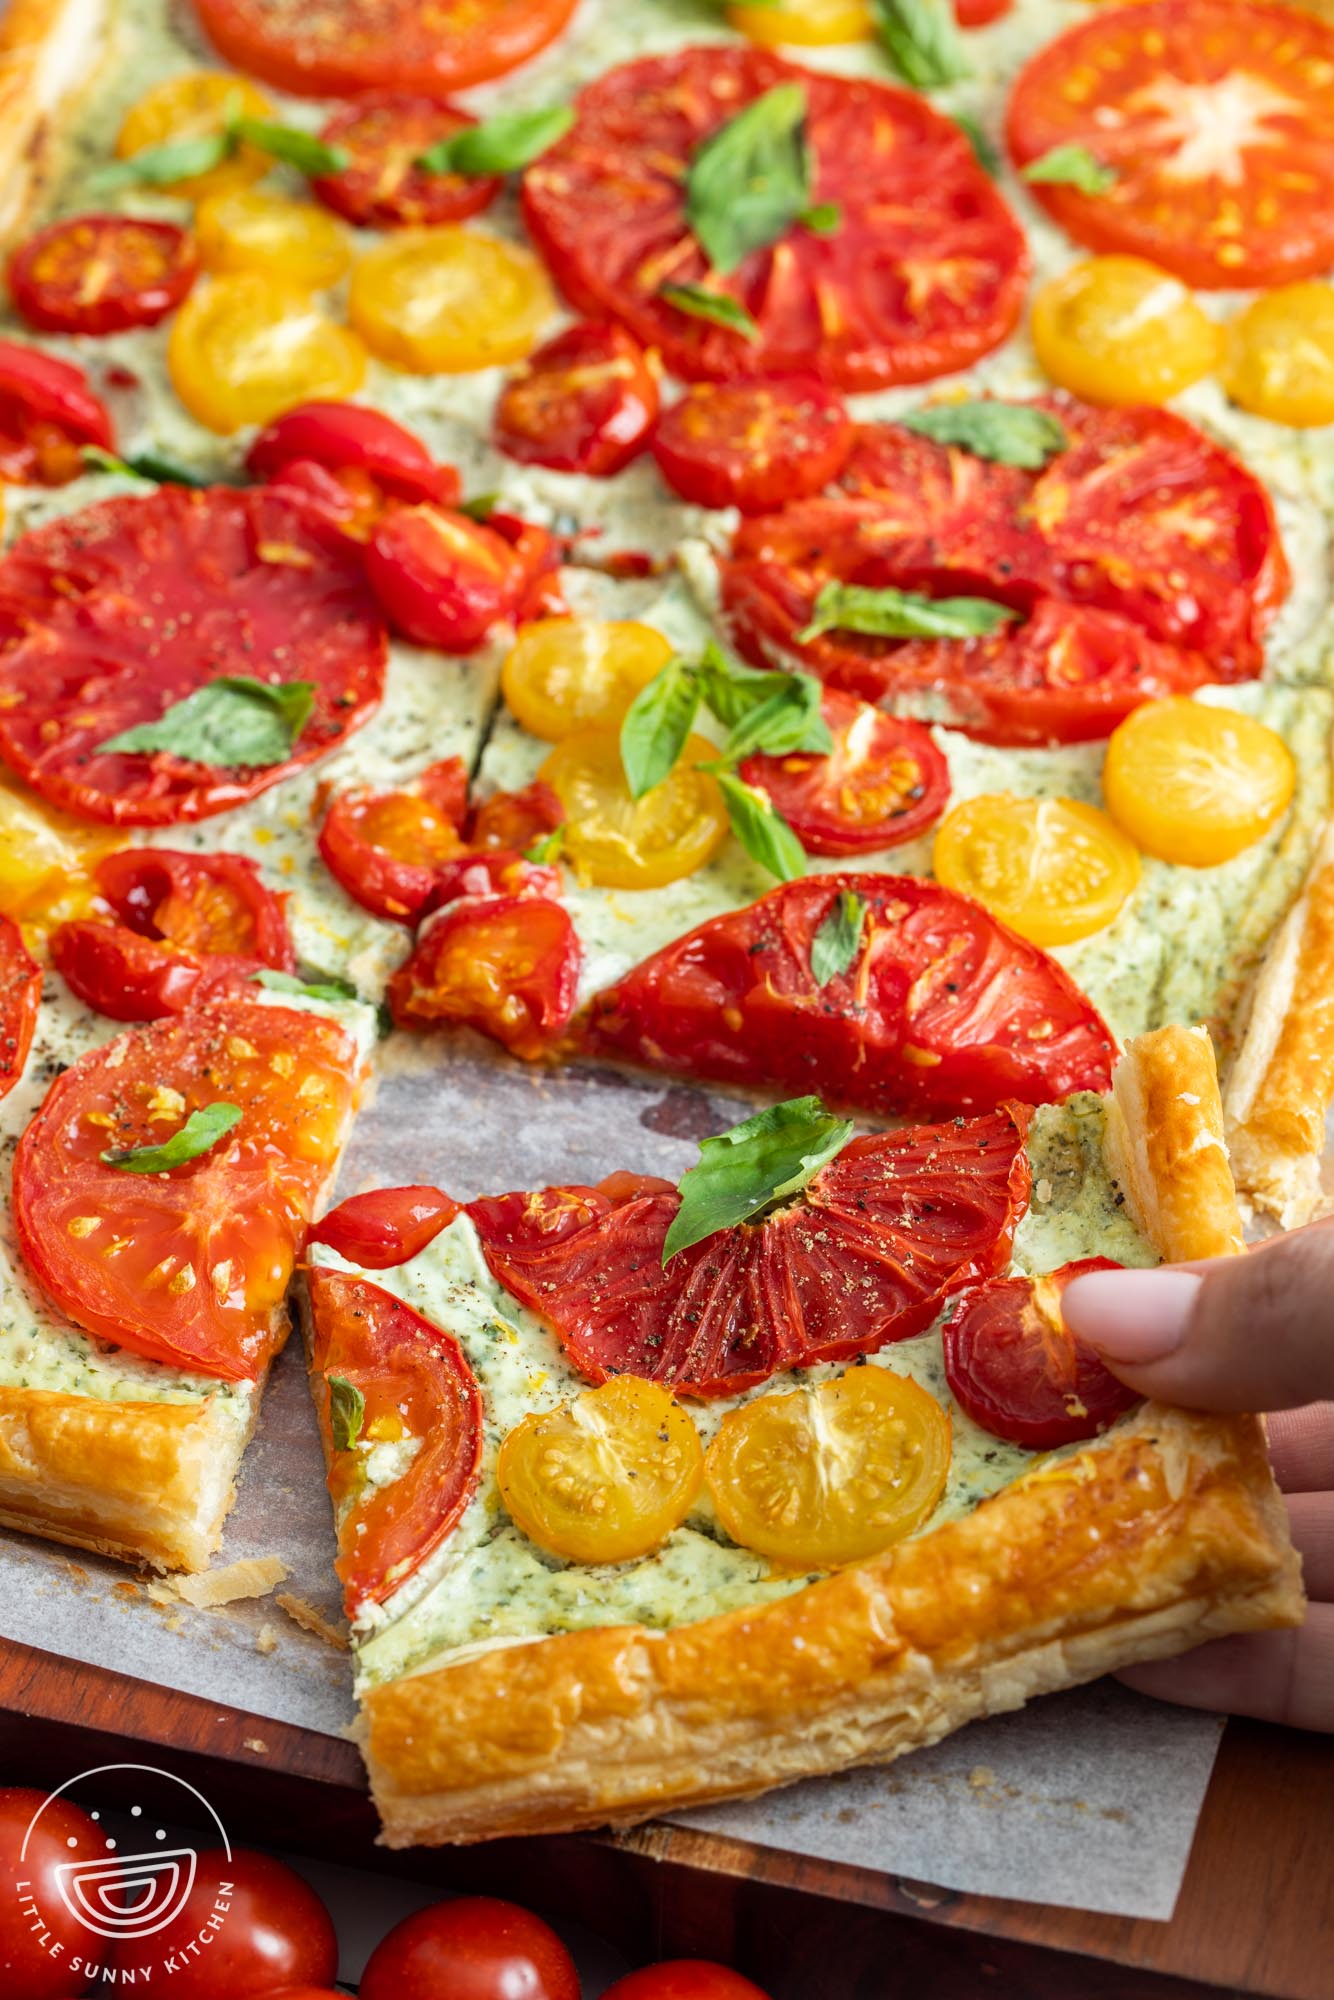 a tomato tart cut into squares. a hand is picking up a corner piece.